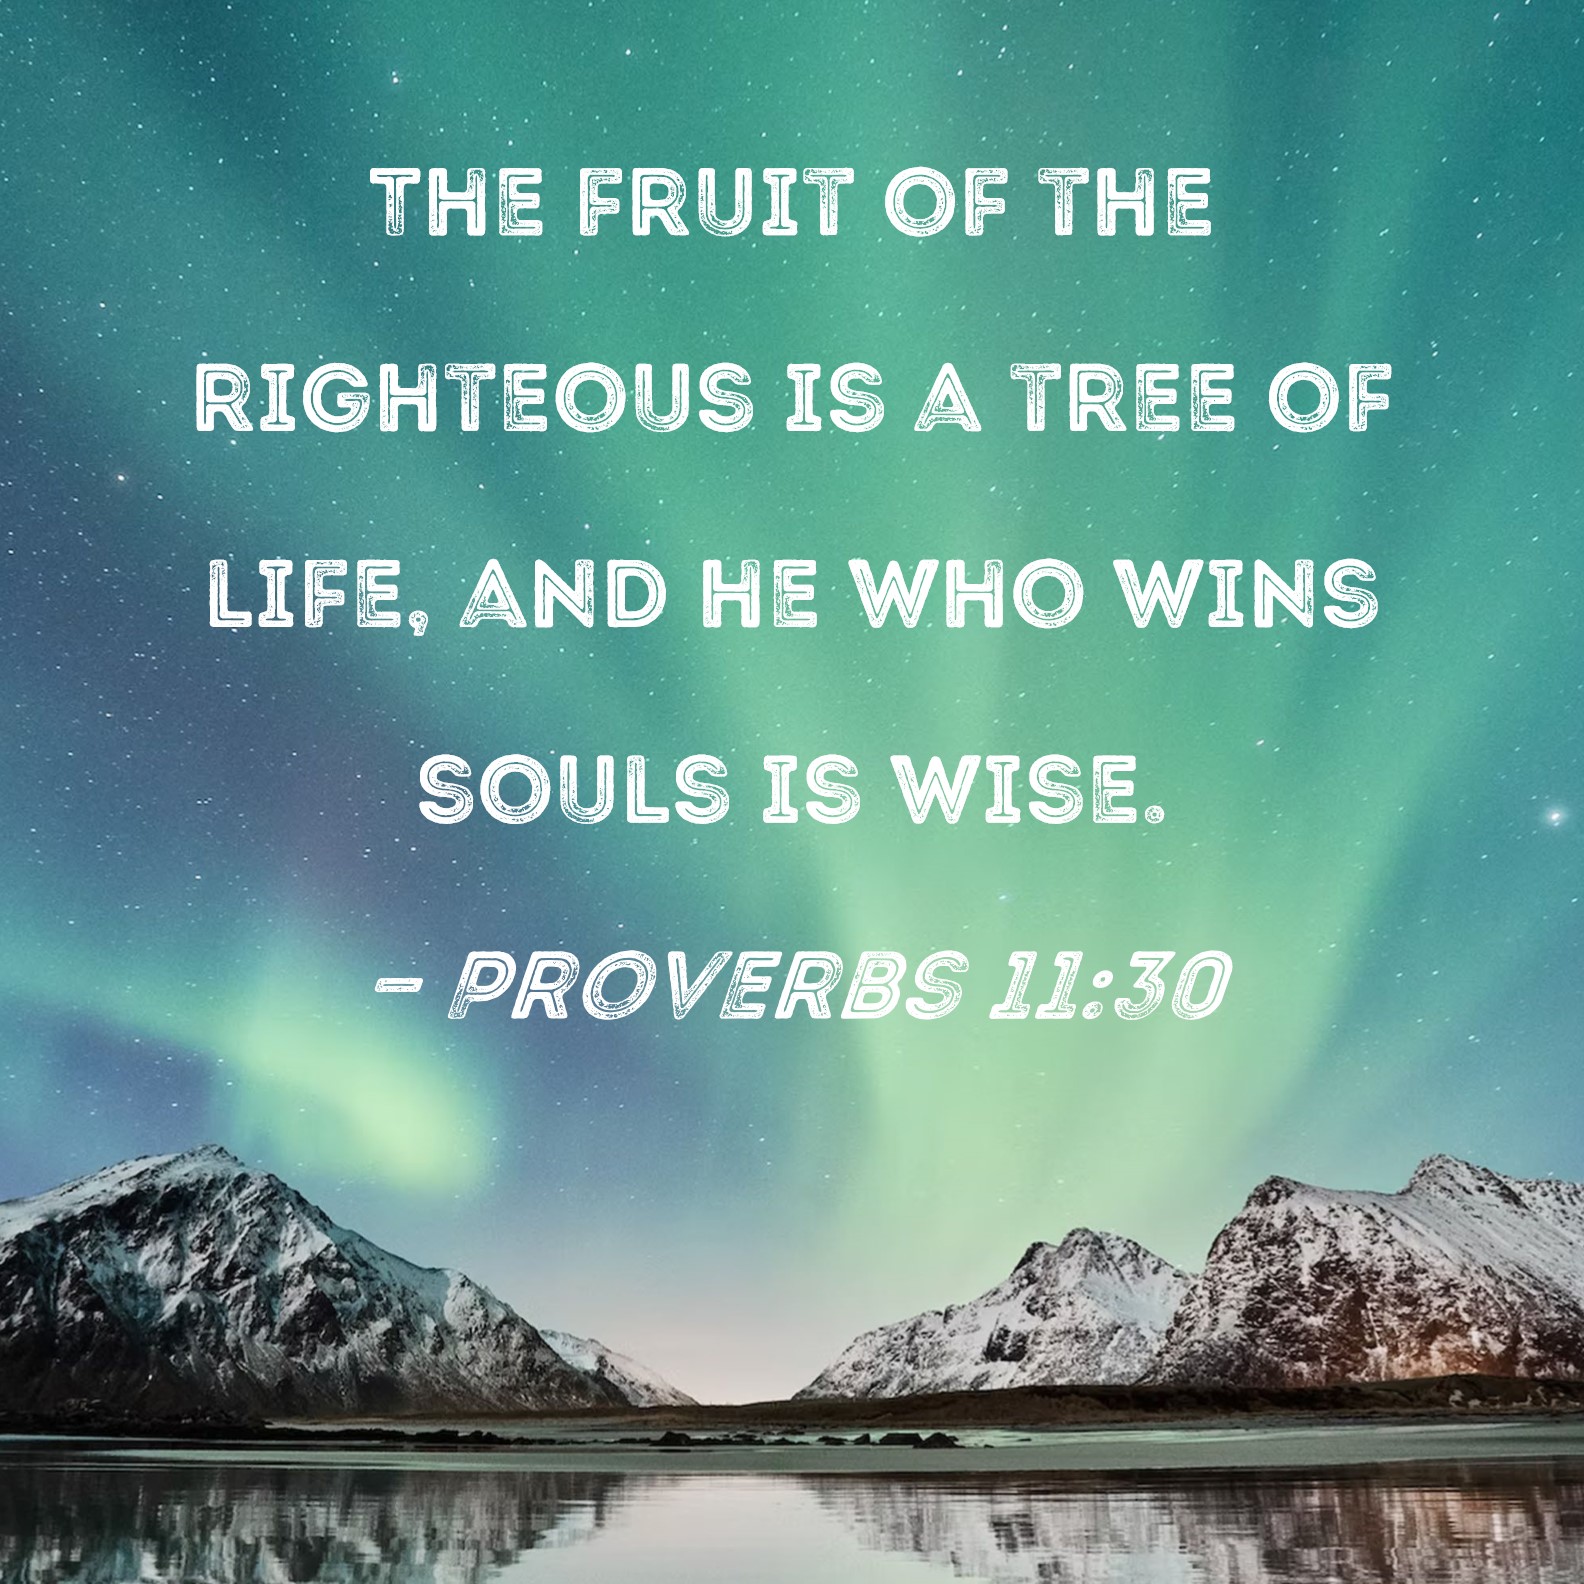 proverbs-11-30-the-fruit-of-the-righteous-is-a-tree-of-life-and-he-who-wins-souls-is-wise